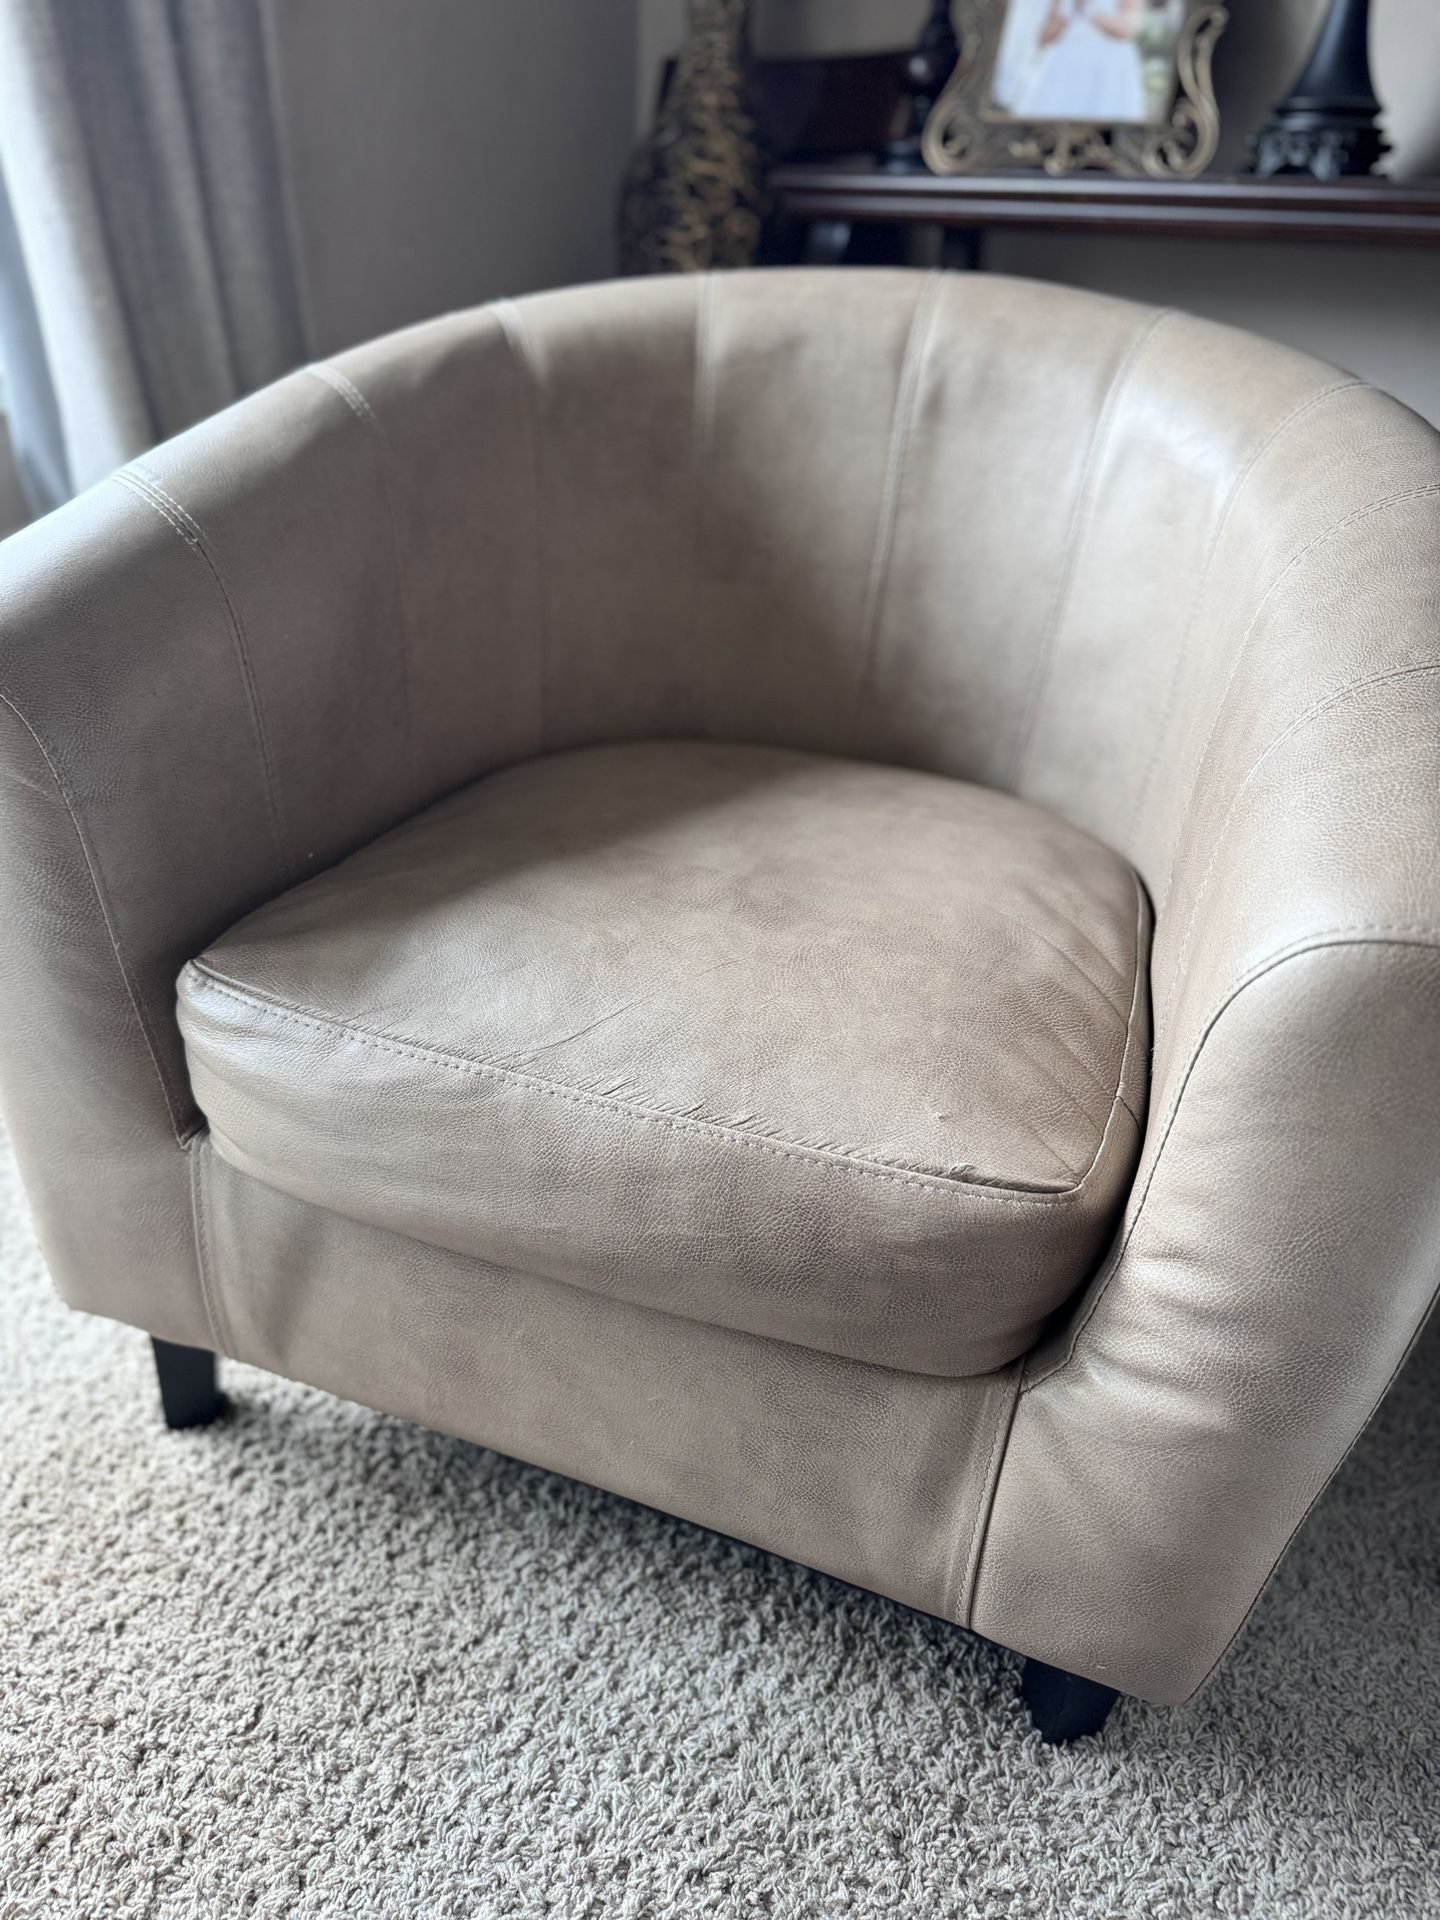 Faux Leather Chair Couch 